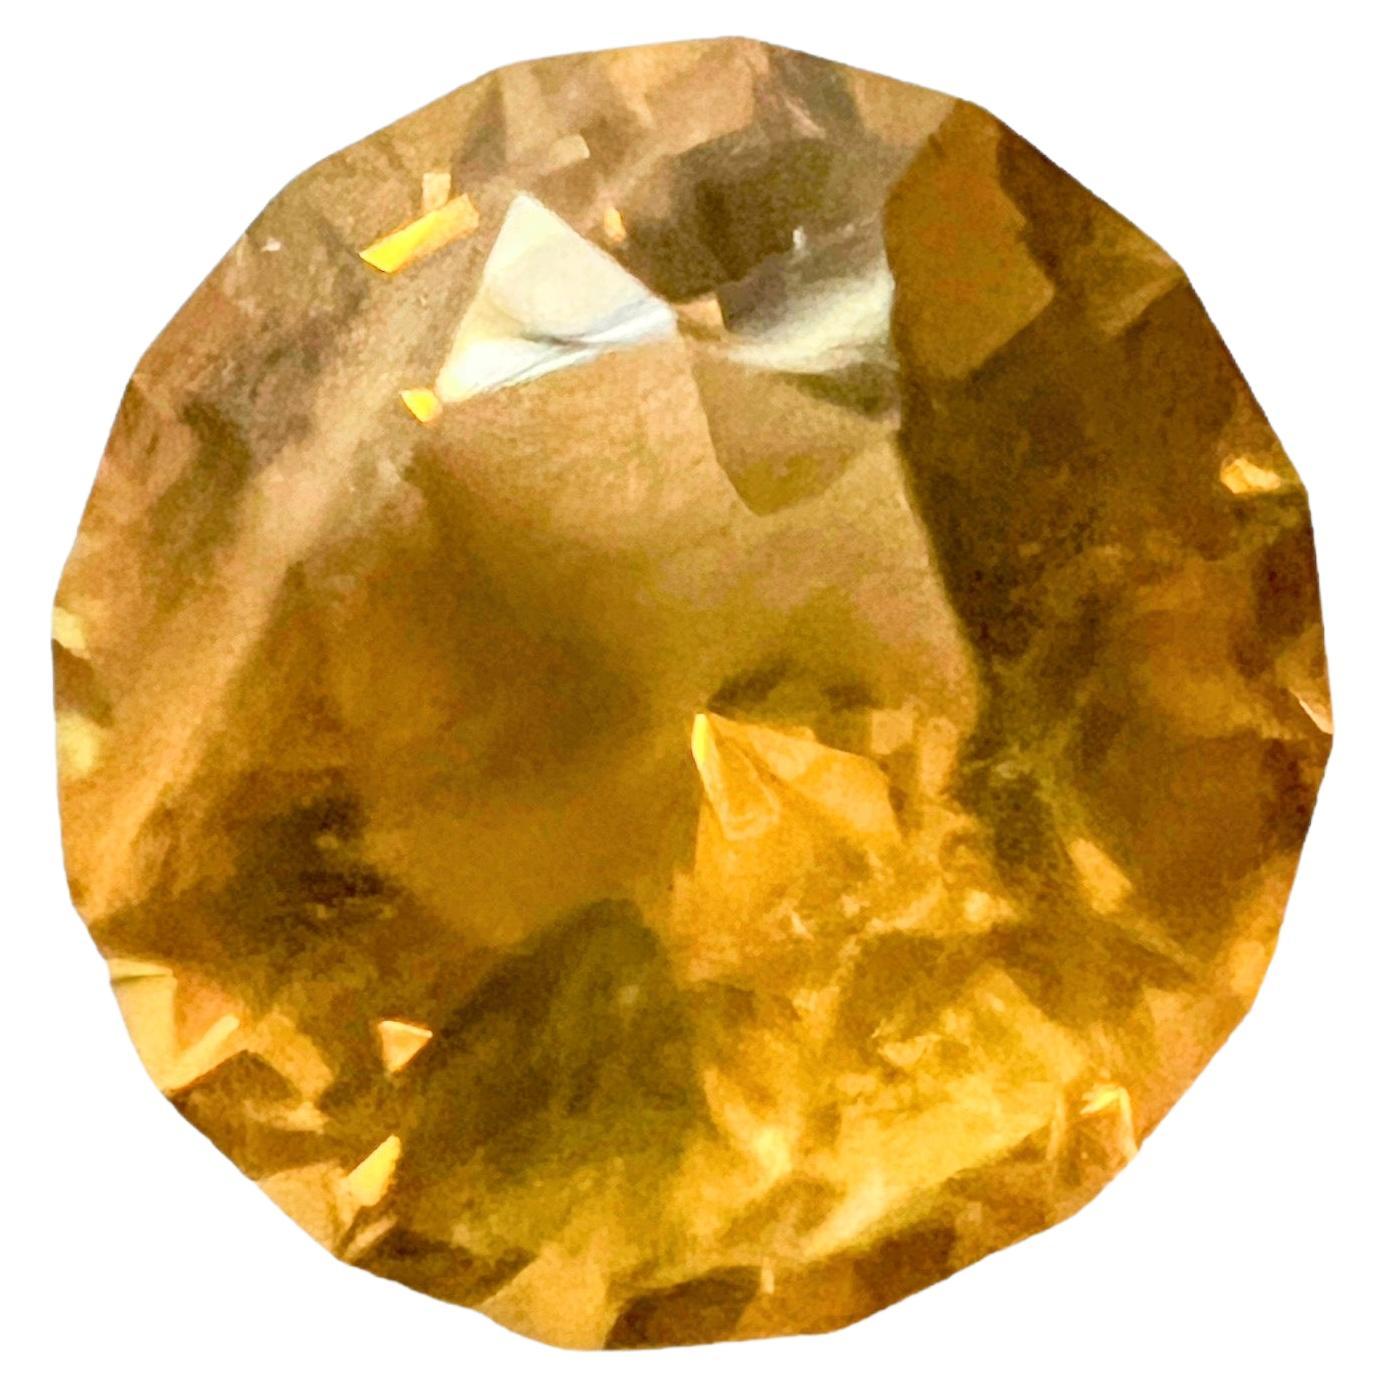 Introducing the 7.13ct Round Cut Natural Citrine, a gemstone that captures the essence of pure, unadulterated warmth and energy. This citrine gem boasts a captivating round cut, bringing forth its inherent brilliance and stunning golden